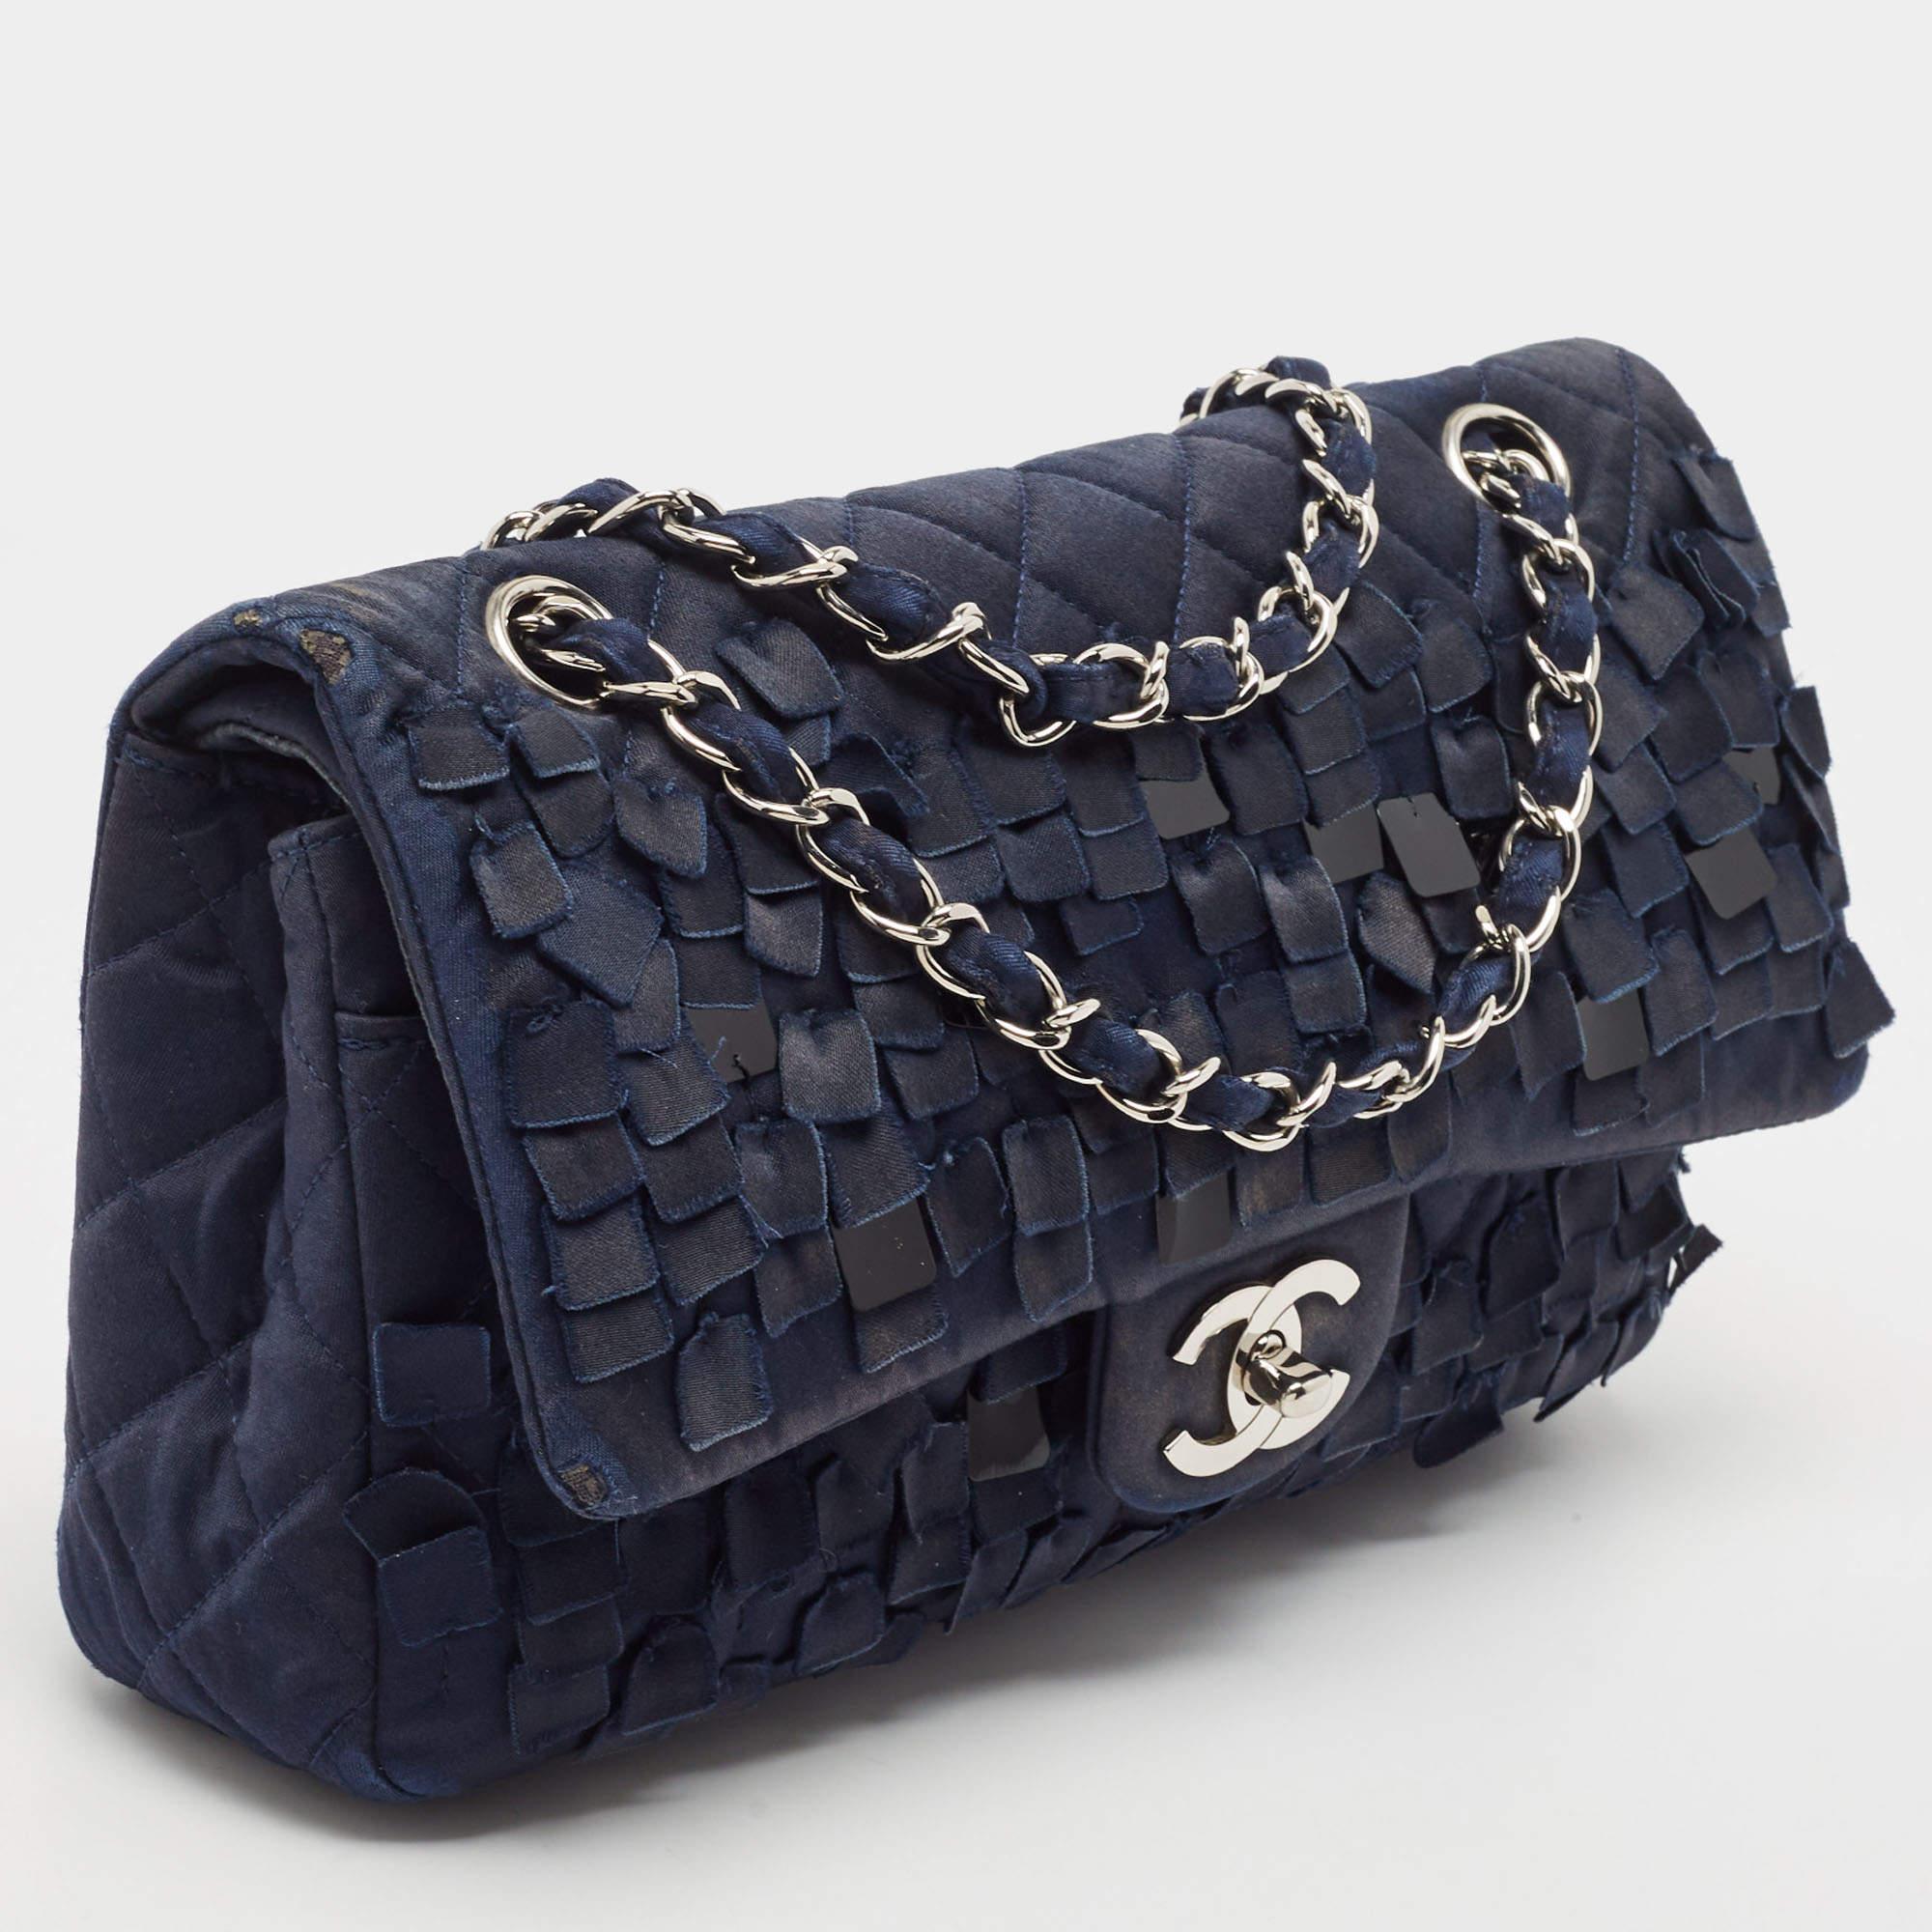 Chanel Navy Blue Quilted Satin Medium Classic Double Flap Bag In Good Condition For Sale In Dubai, Al Qouz 2